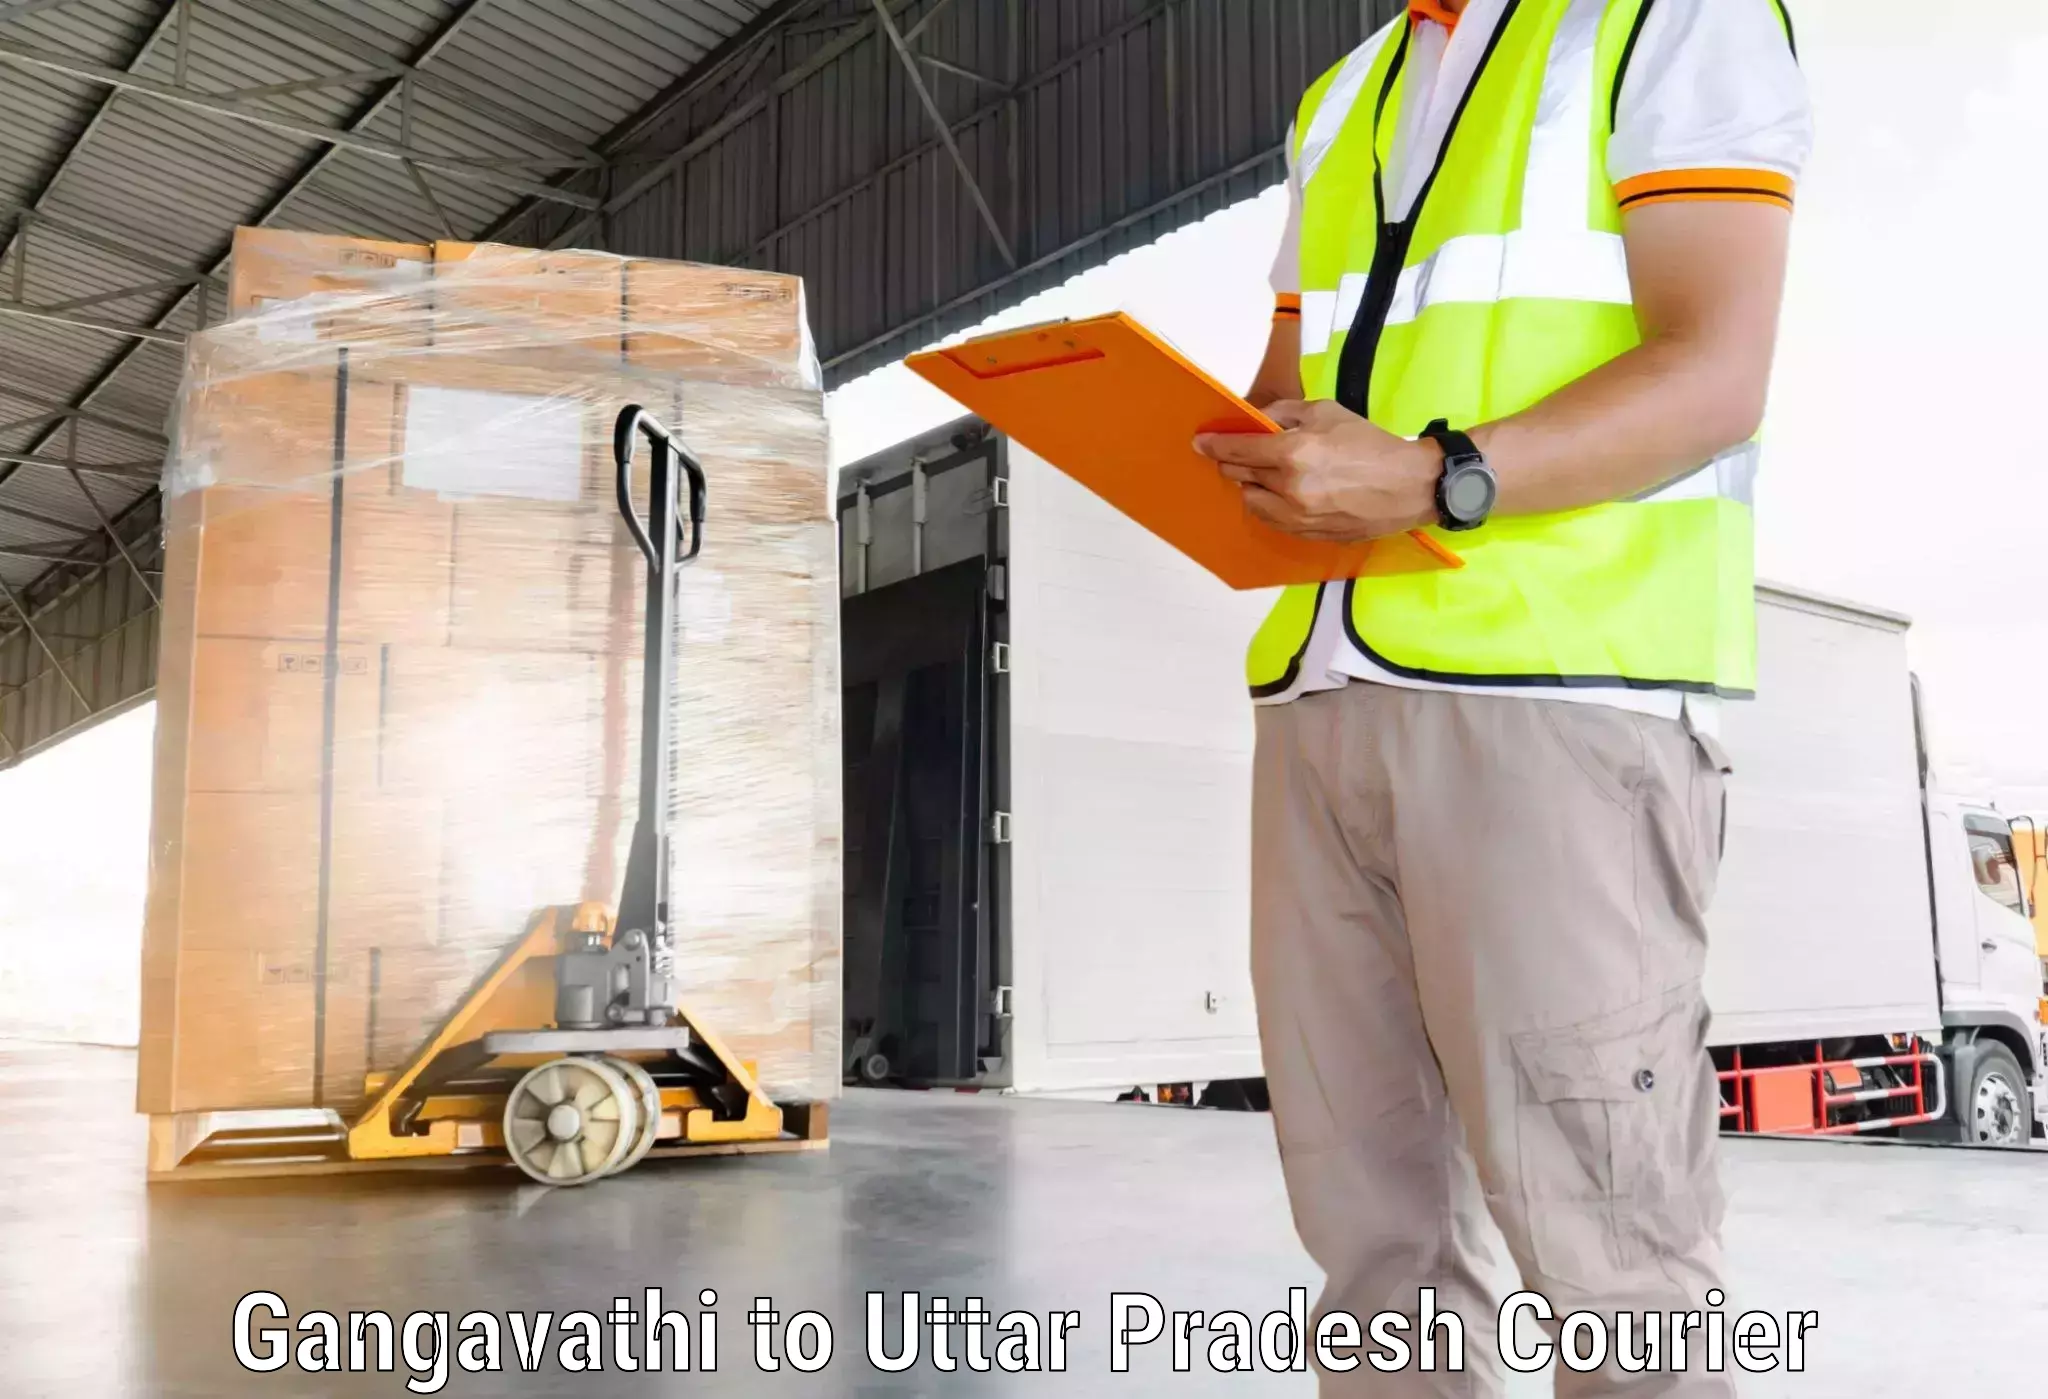 Reliable parcel services in Gangavathi to Cholapur